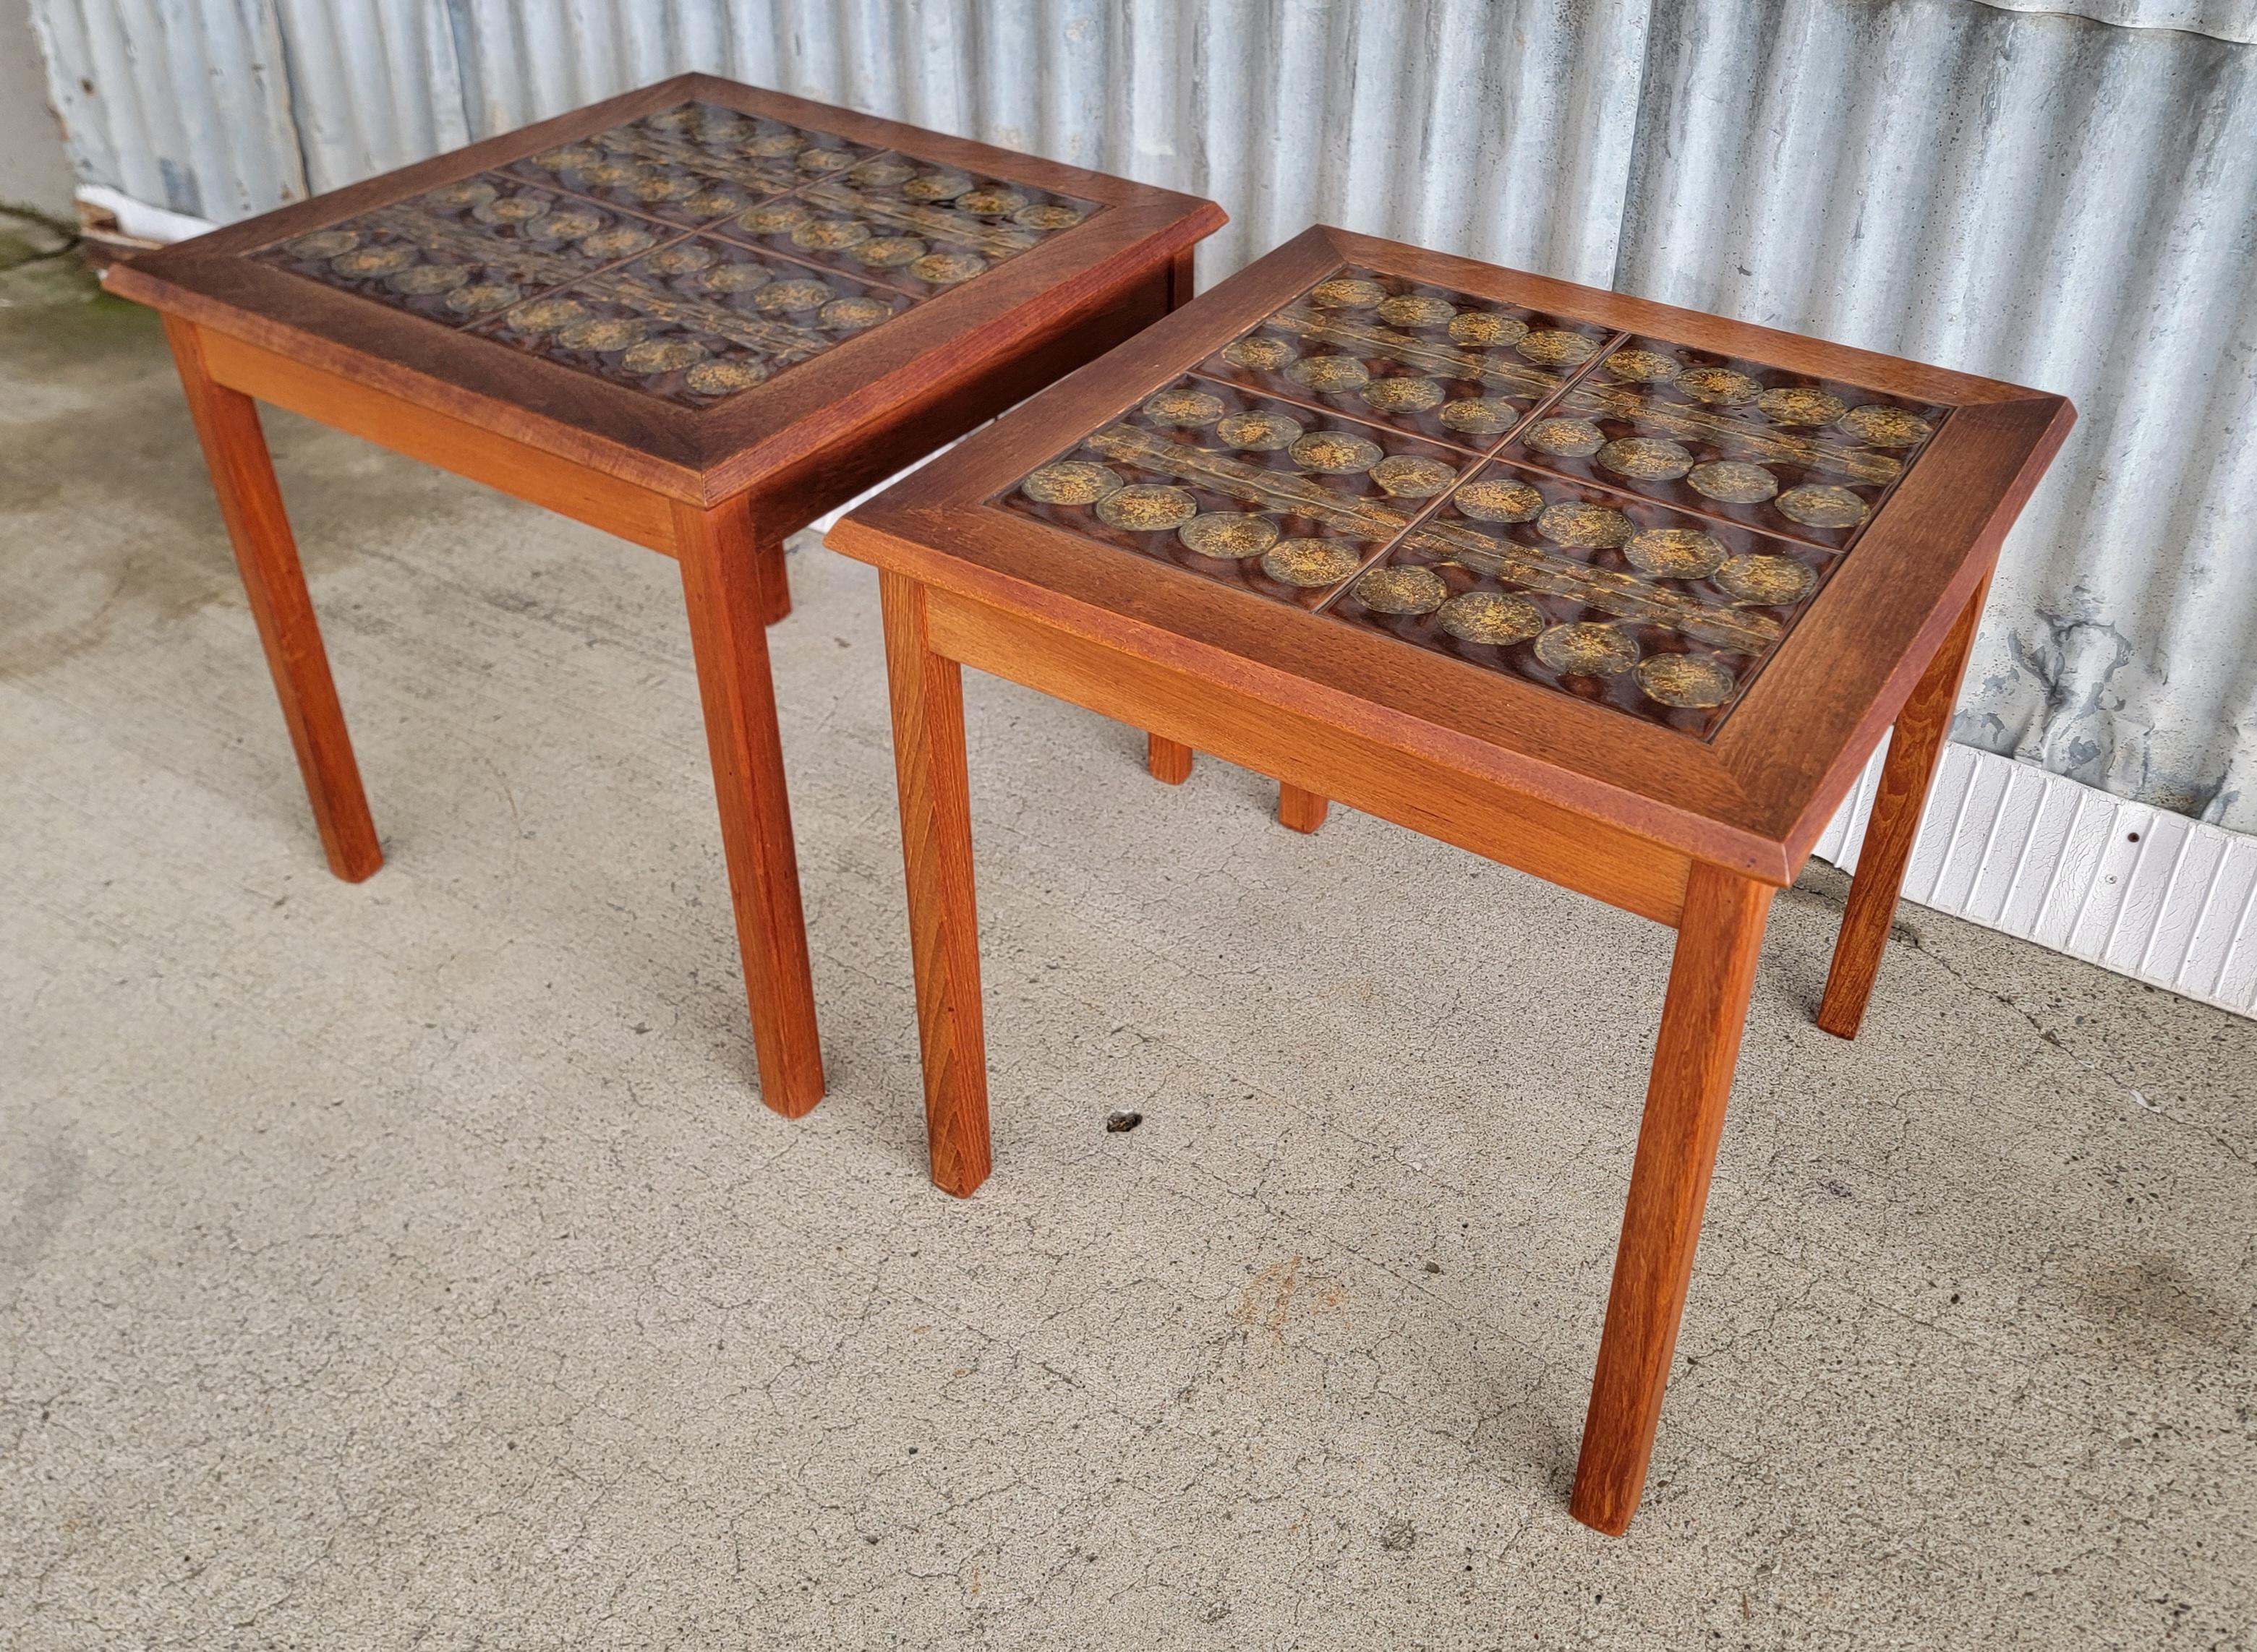 Nice pair of Danish Modern teak and ceramic tile top side or end tables. Each table has 4 abstract gold and brown tiles. Made by Mobelfabrikken Toften, Norway, 1970's. Very good, original condition.